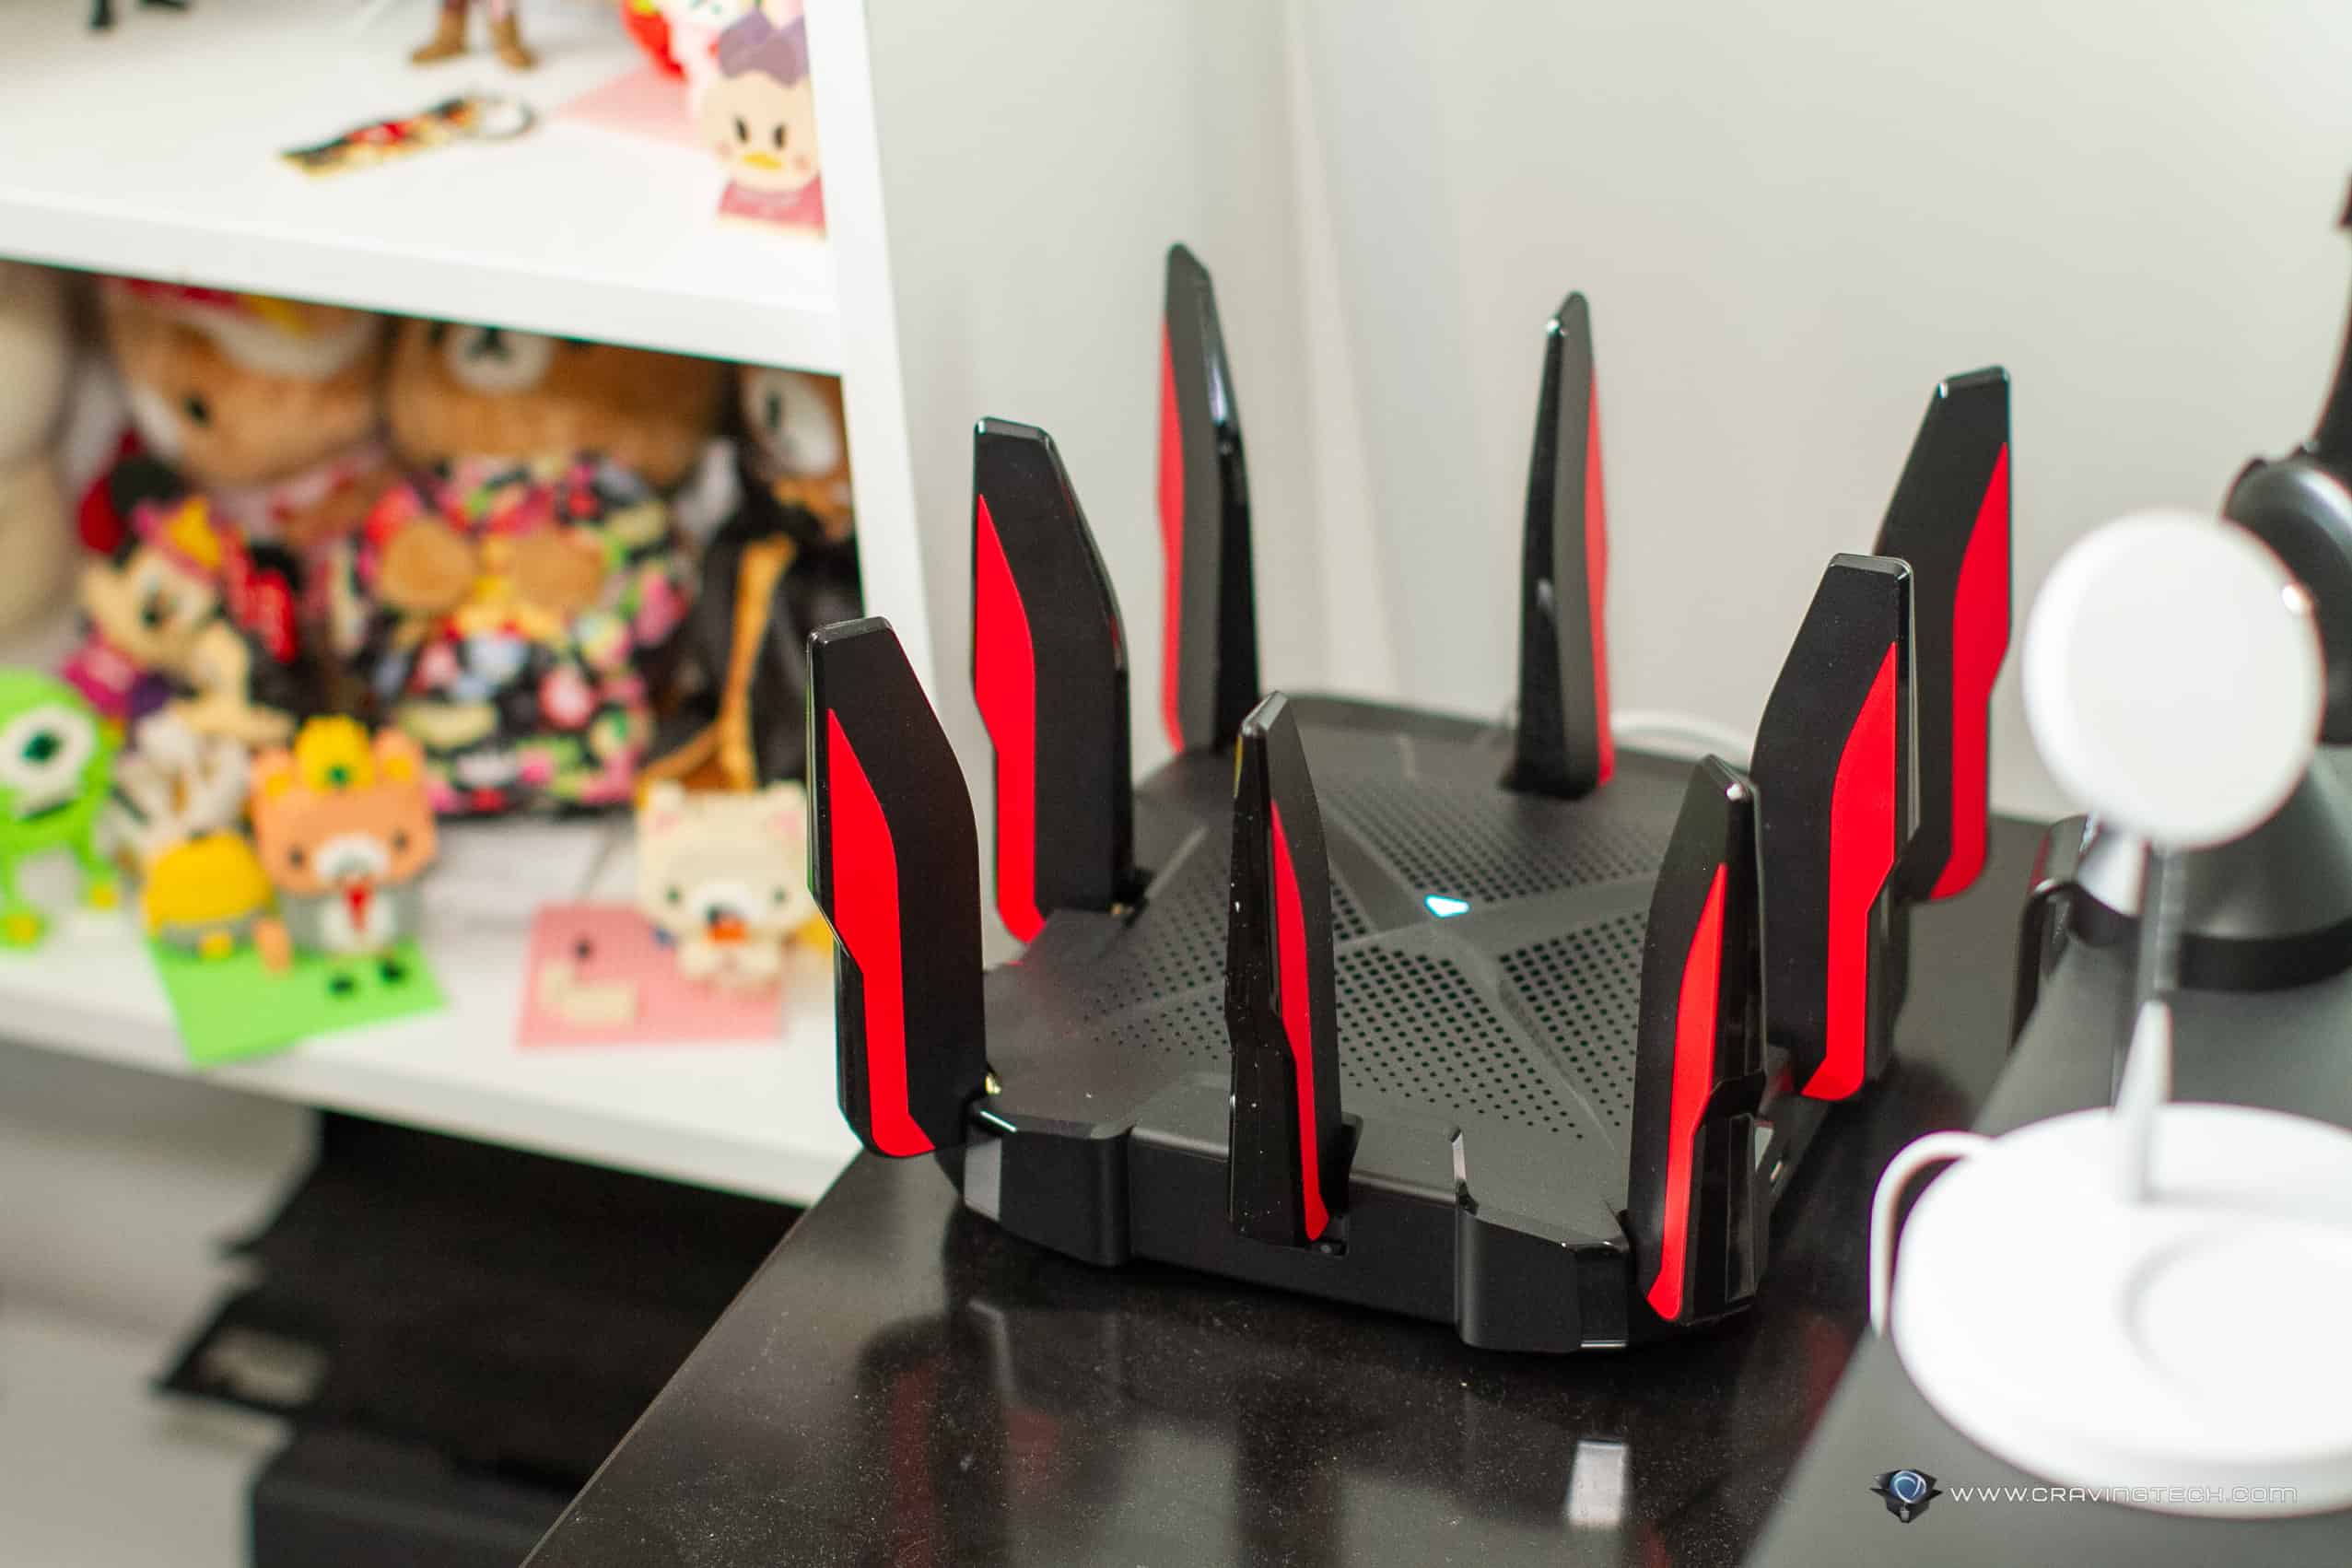 Online, wireless gaming is now made possible with this router – TP-Link Archer GX90 Review